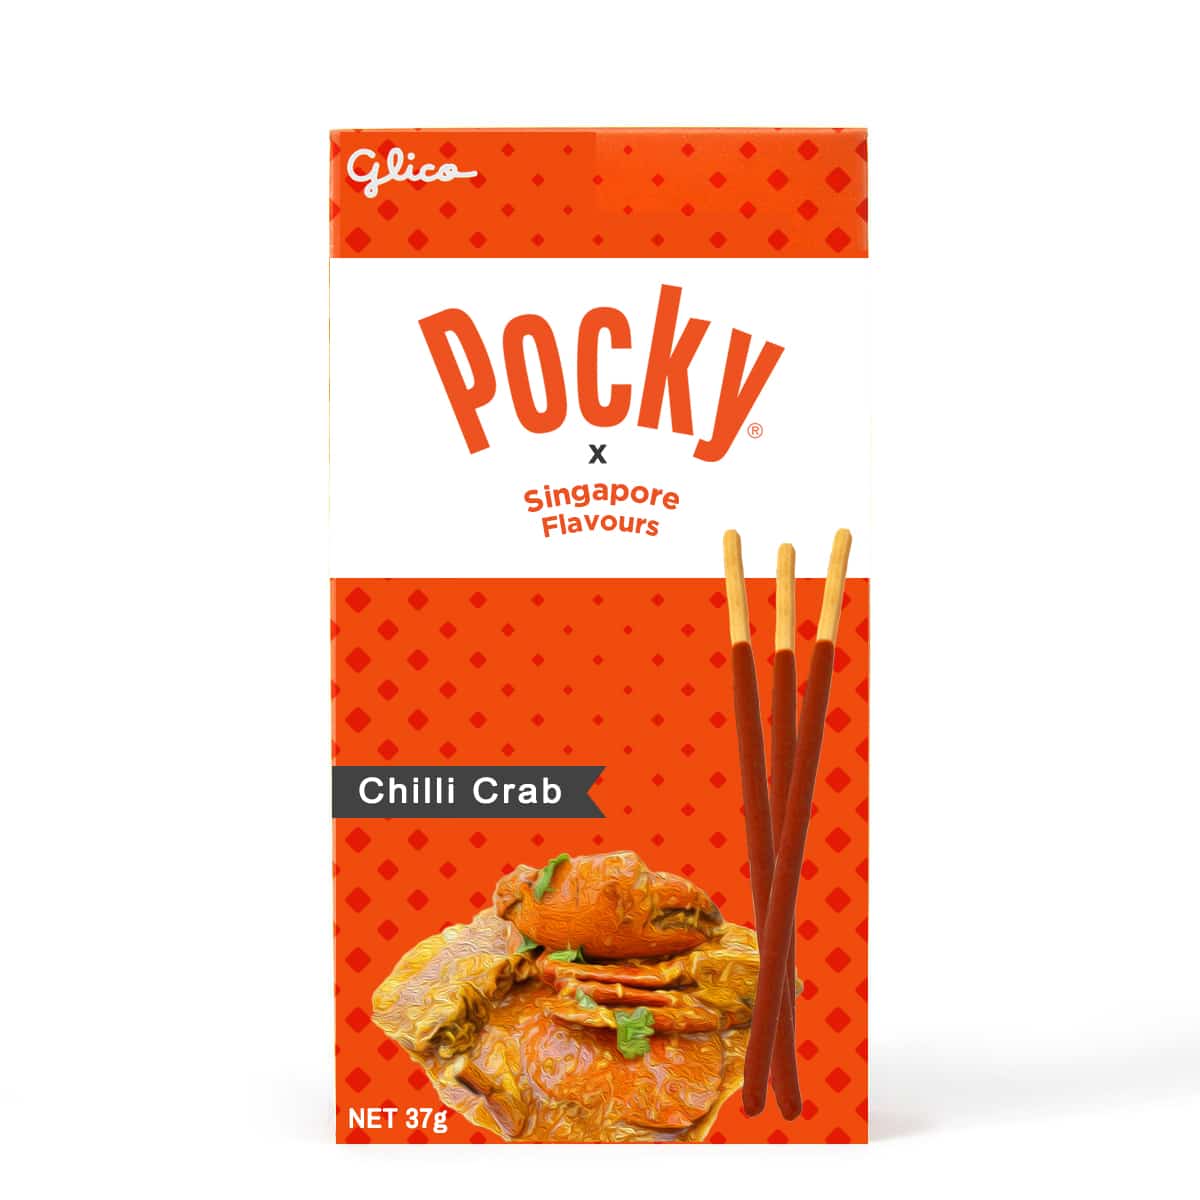 Chilli Crab Pocky Packaging